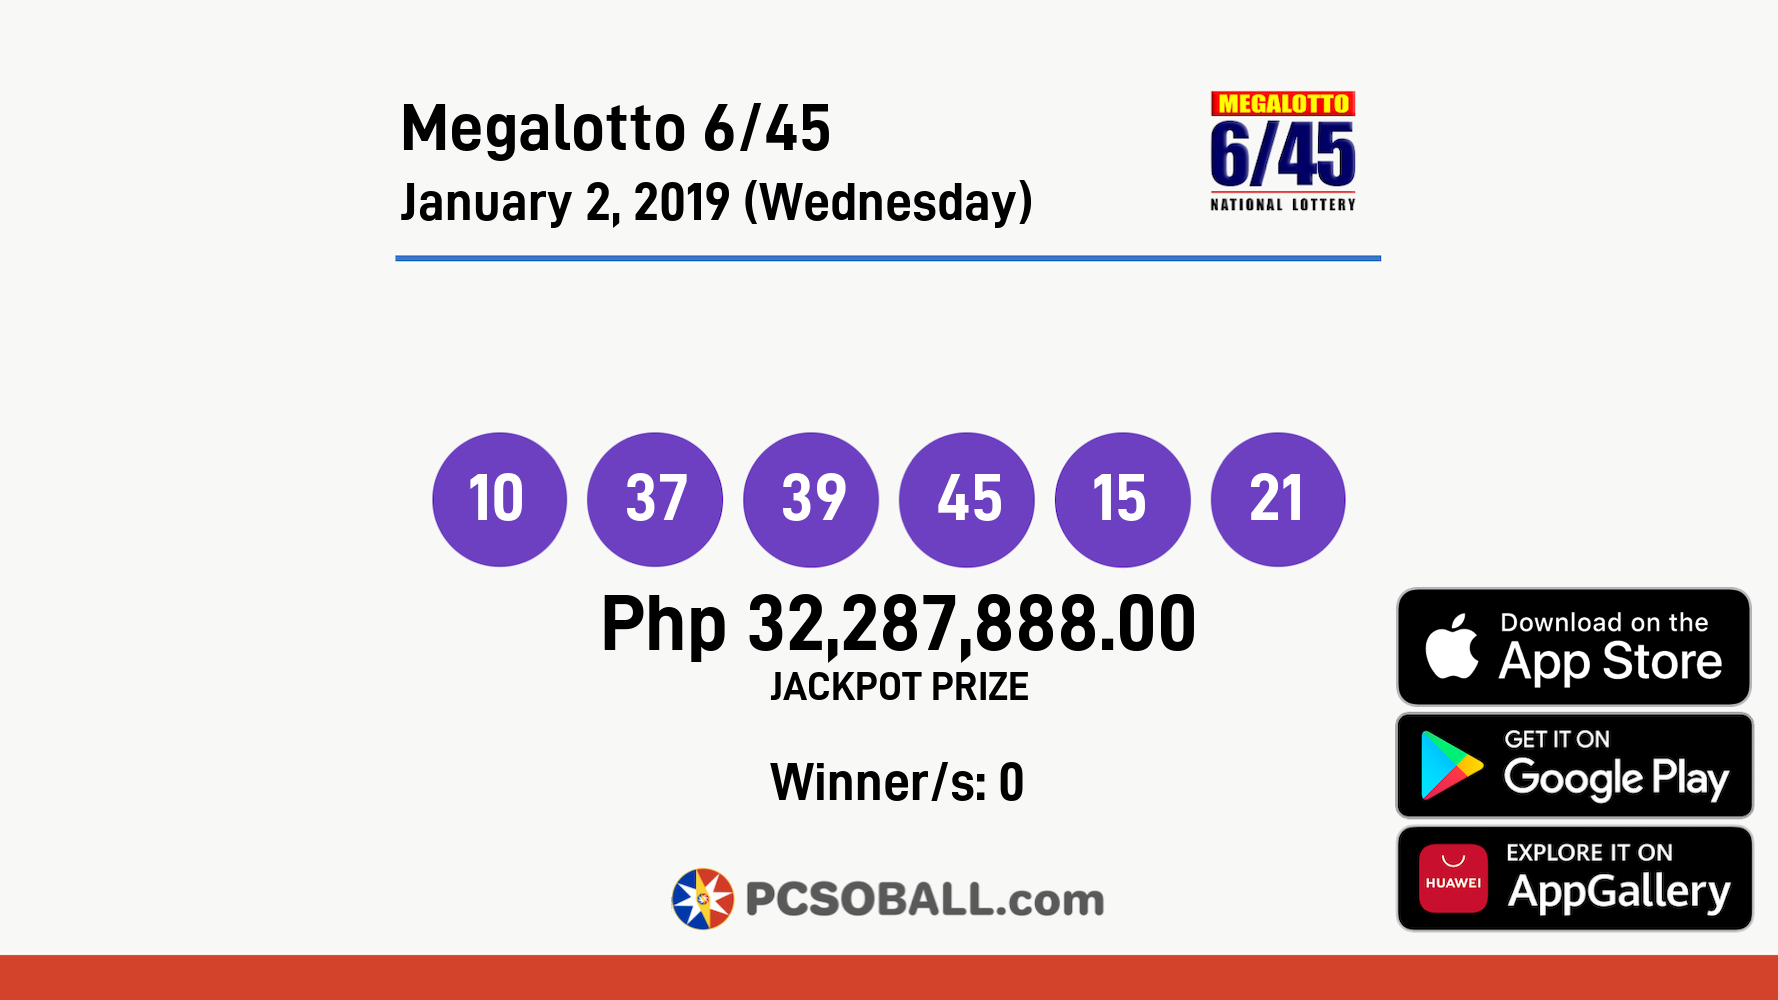 Megalotto 6/45 January 2, 2019 (Wednesday) Result